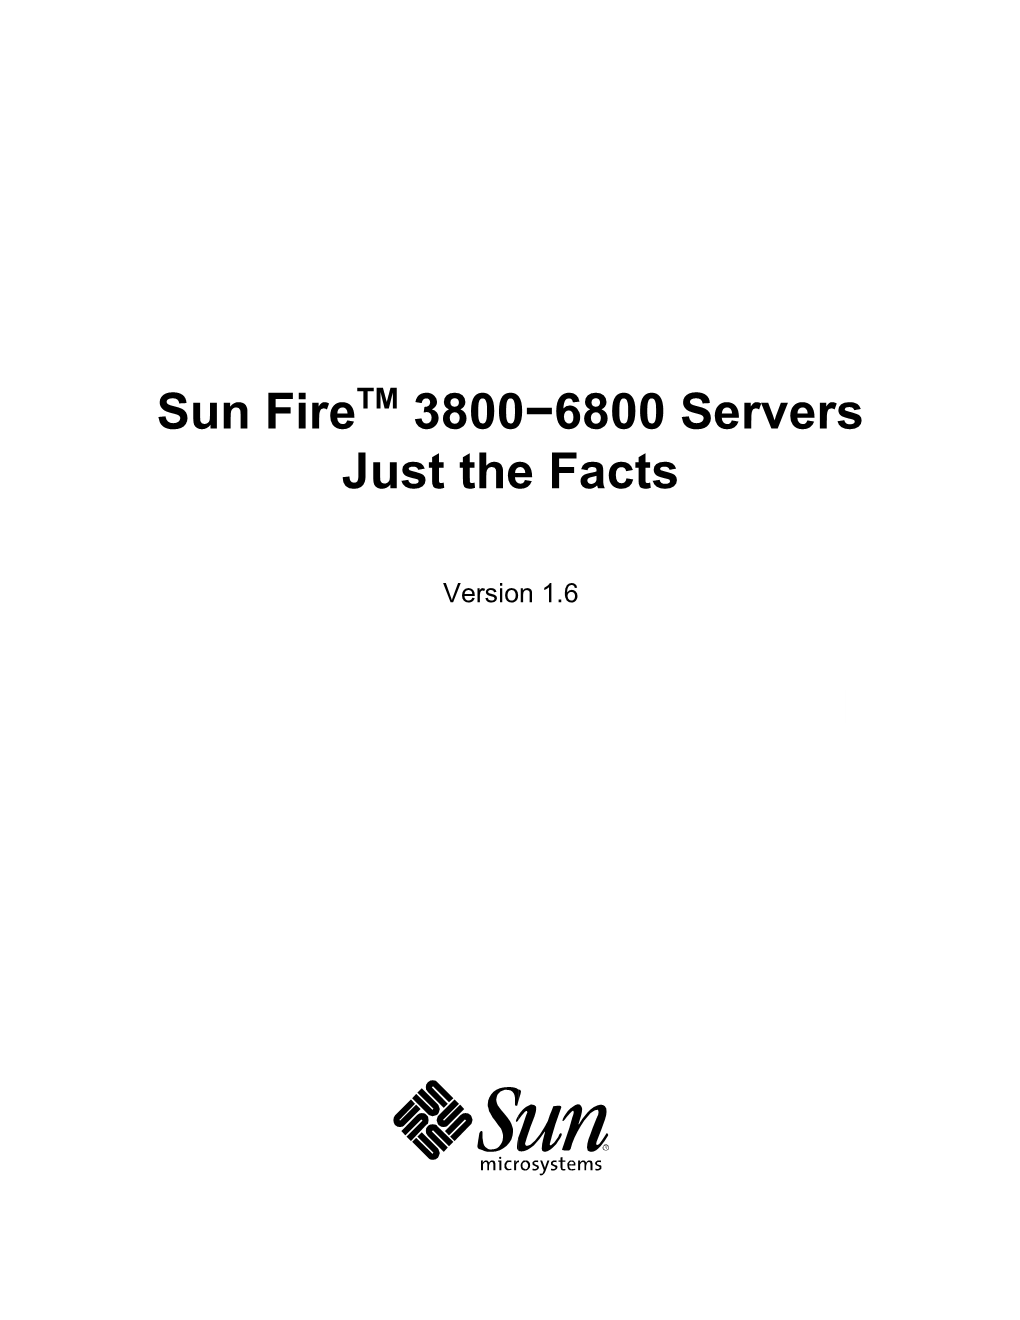 Sun Fire 3800−6800 Servers Just the Facts